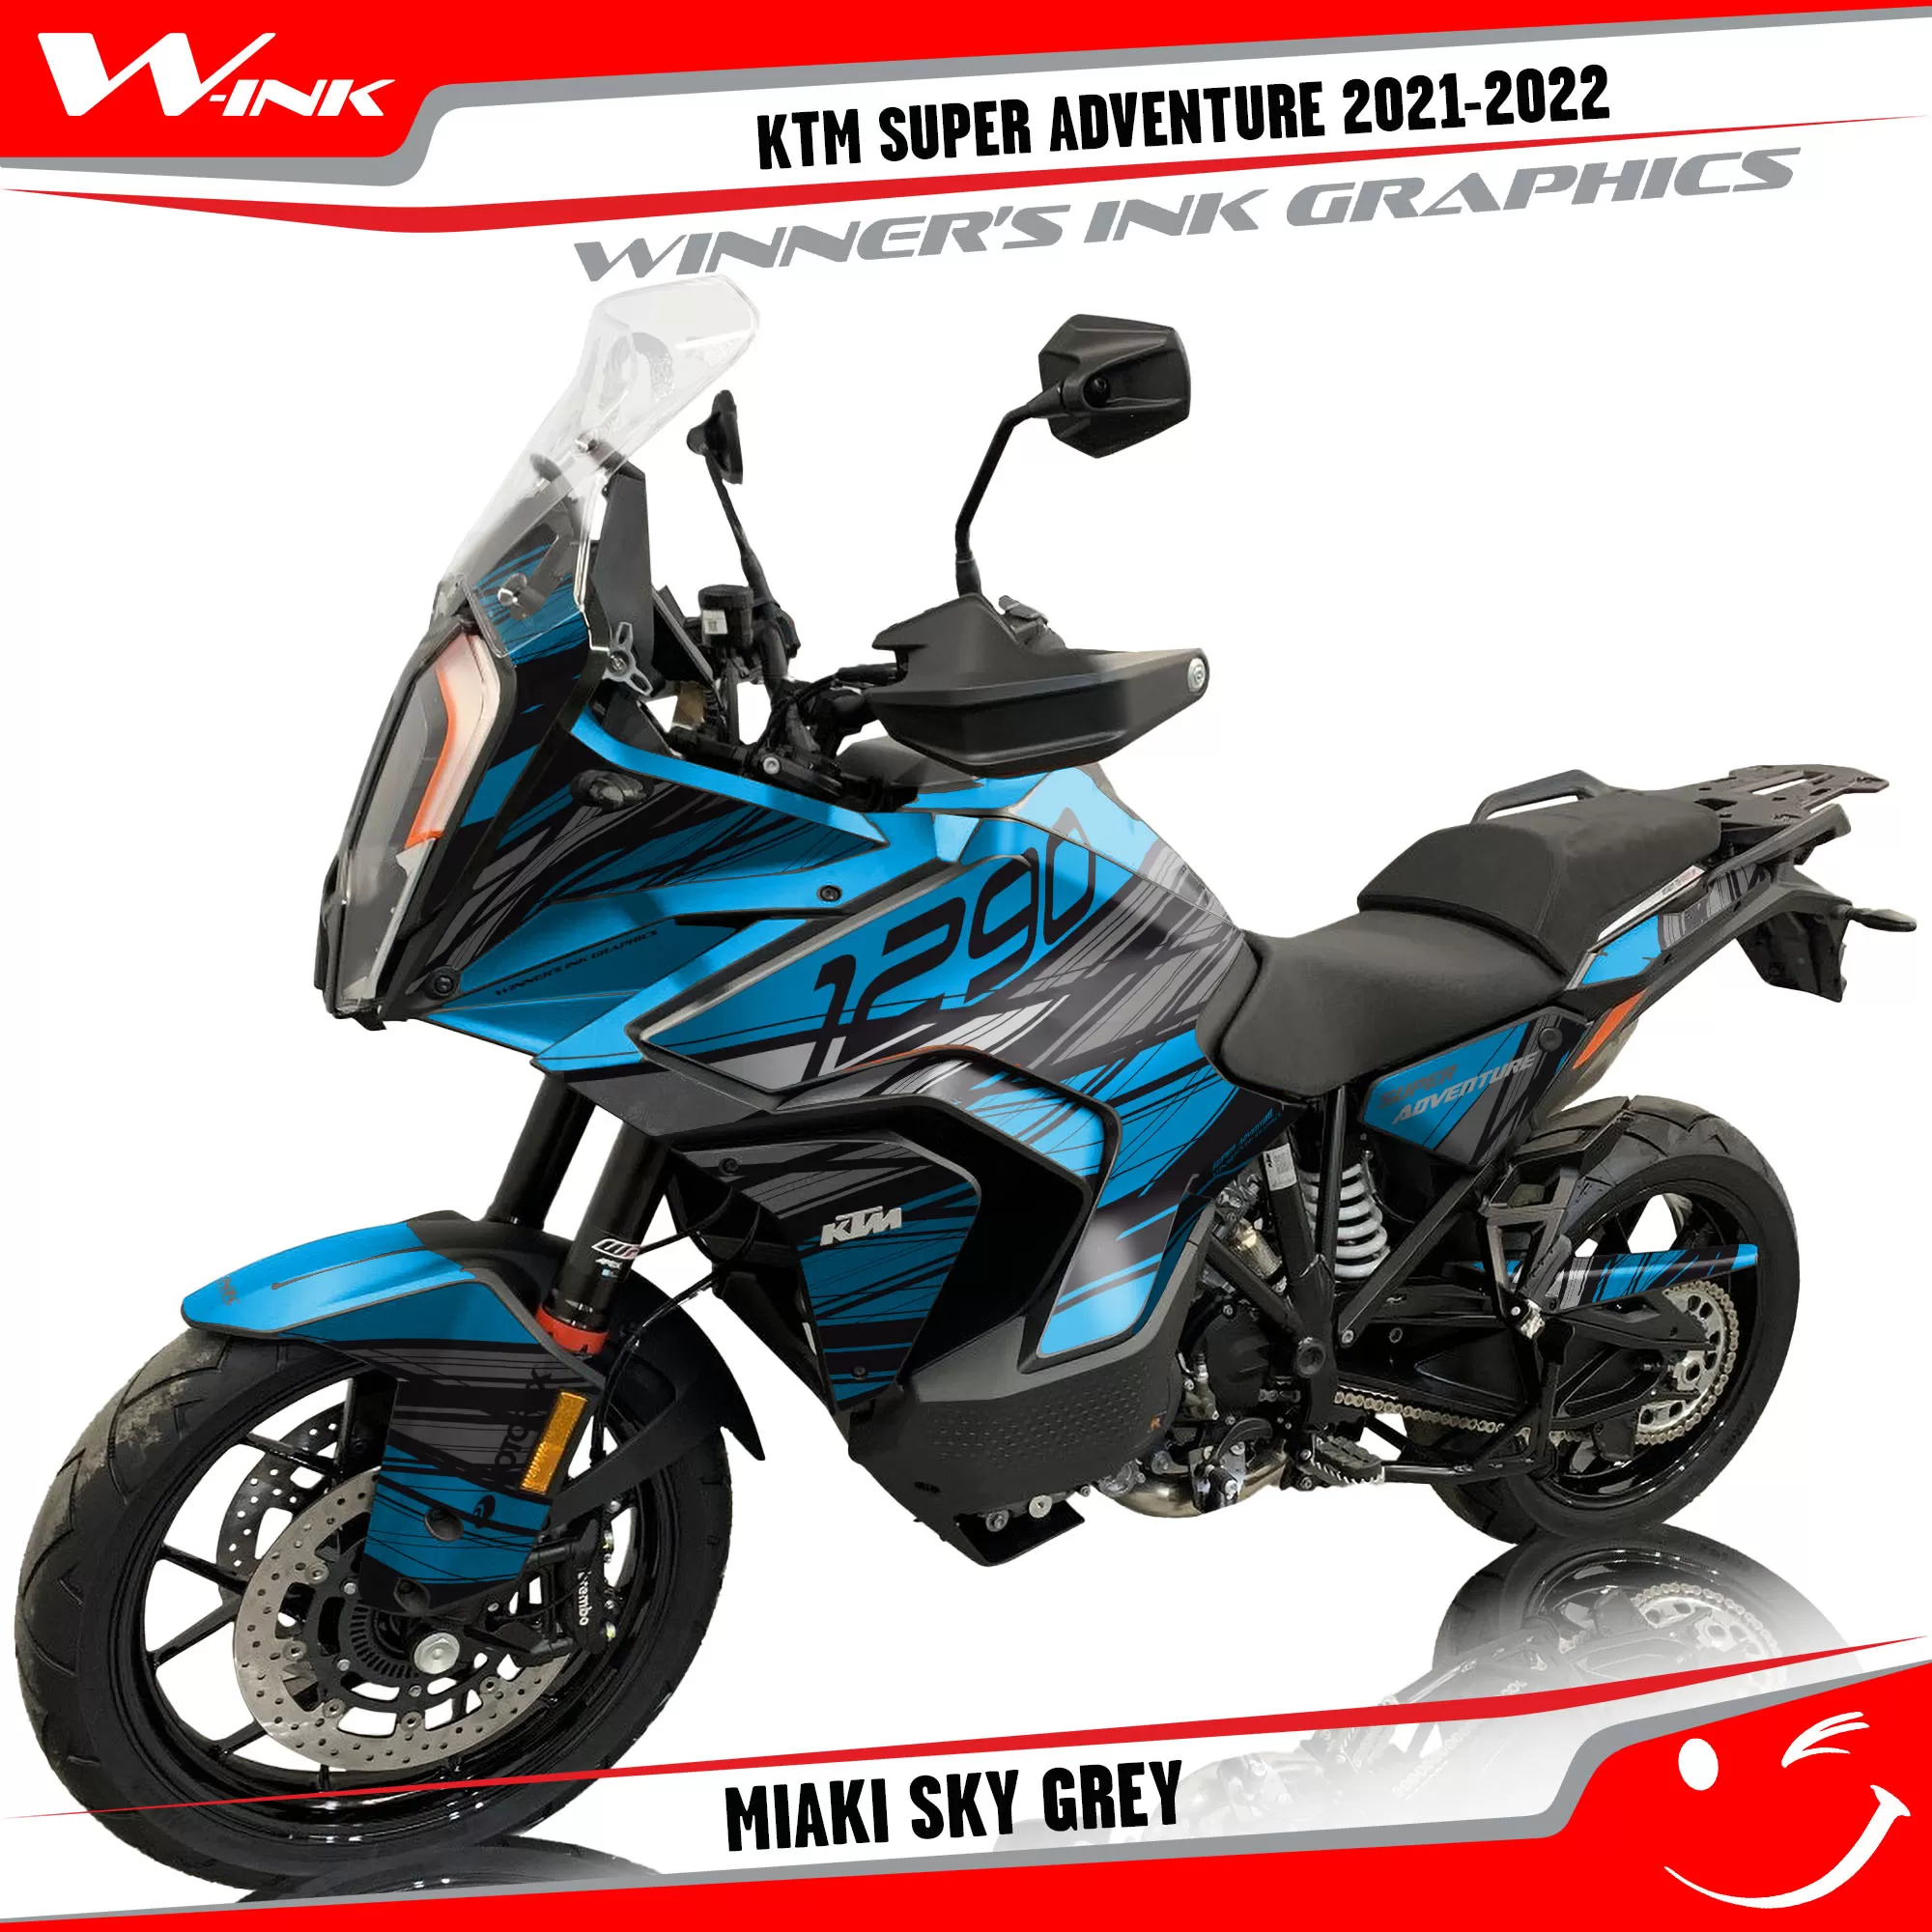 KTM-Super-Adventure-S-2021-2022-graphics-kit-and-decals-with-designs-Miaki-Sky-Grey